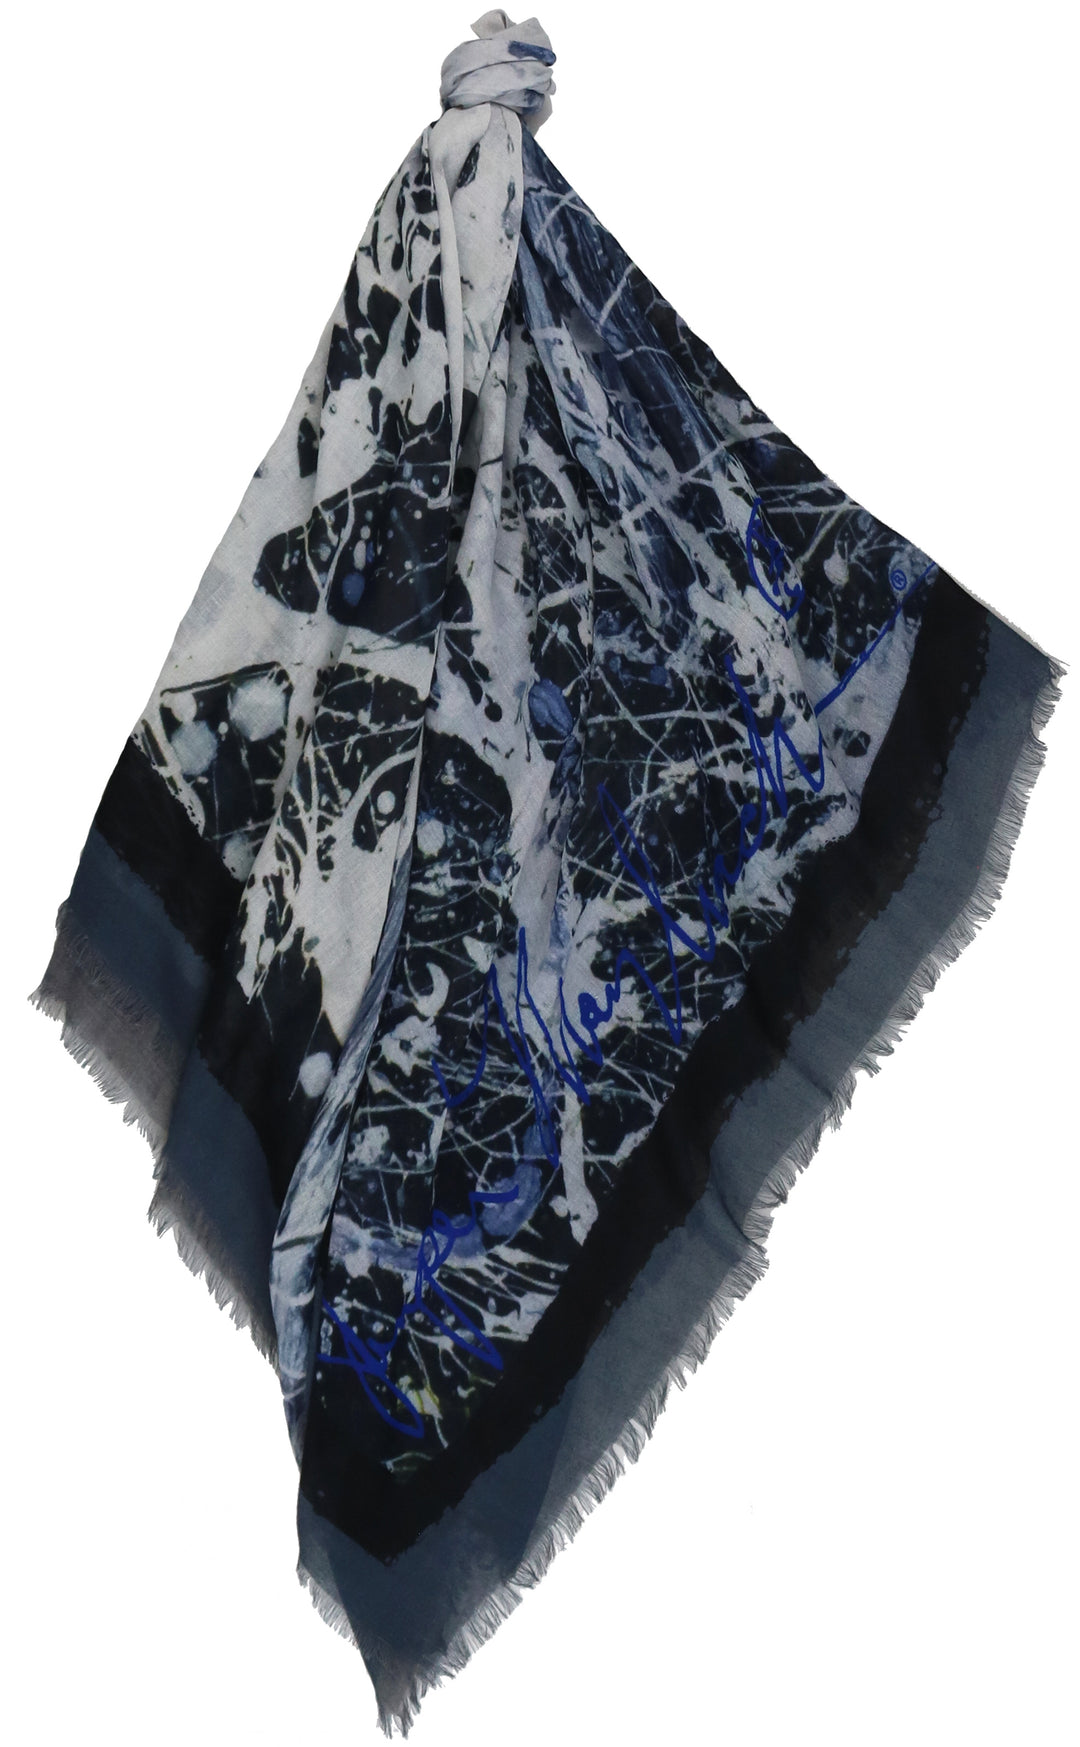 Jumper Maybach X FRAAS "Darkness to Light" Recycled Polyester Square Scarf